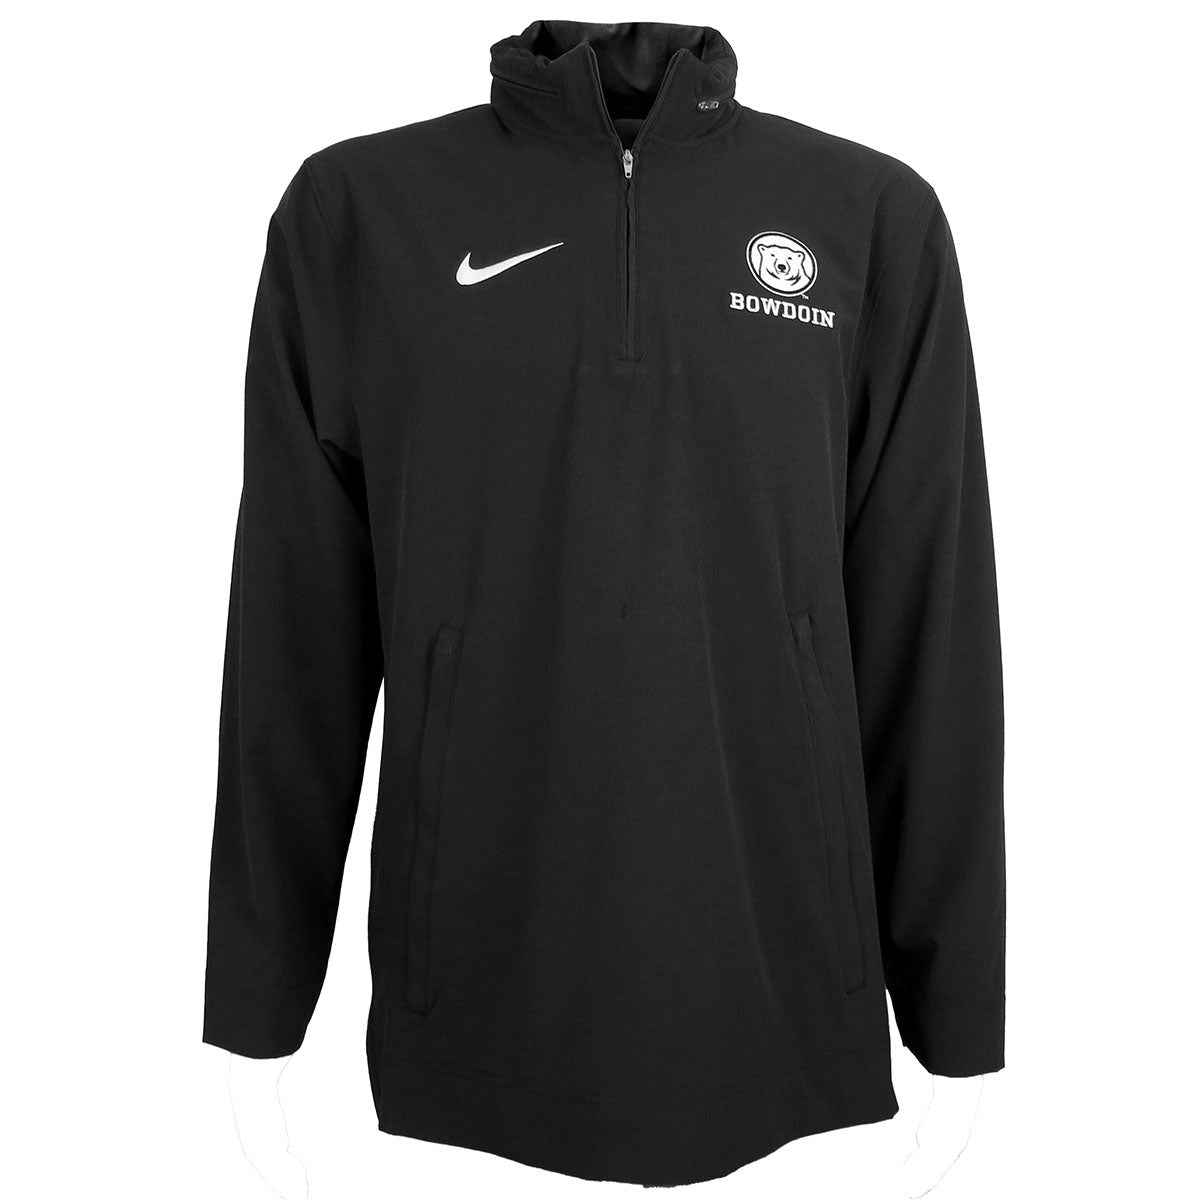 Coach Lightweight ¼-Zip Jacket with Medallion from Nike – The